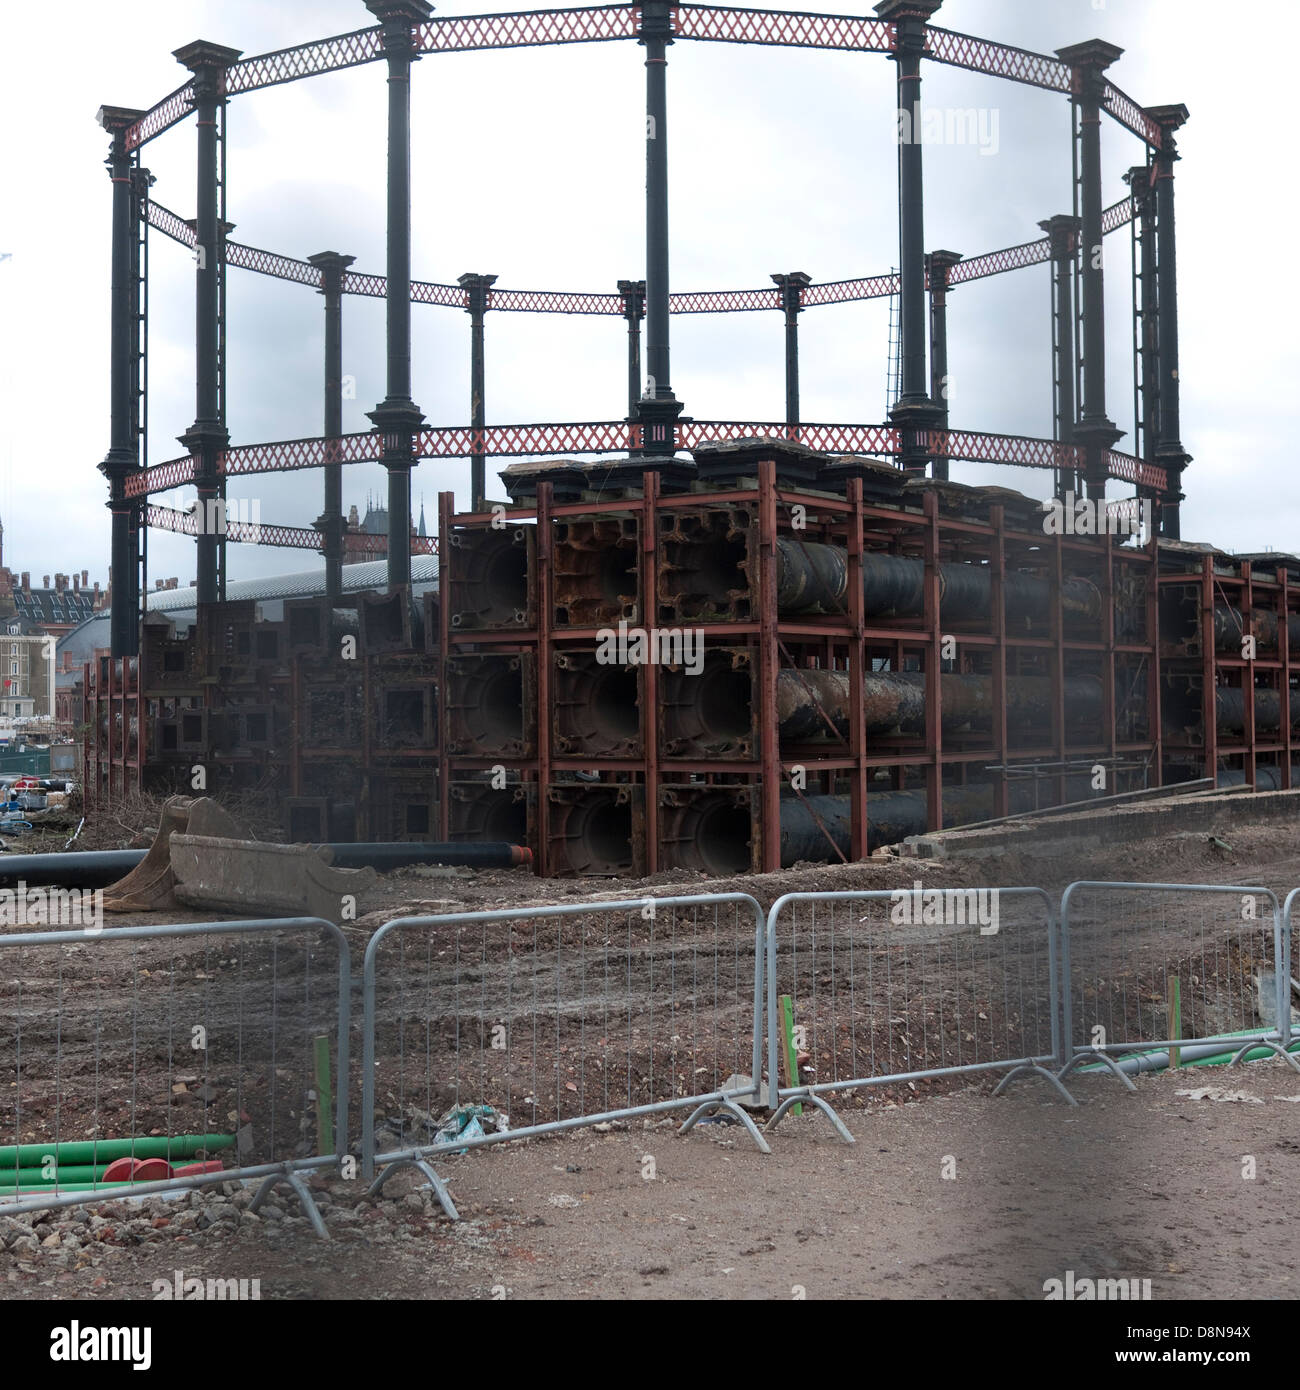 Goods Way gasometers put into storage during redevelopment of King's Cross station and surrounding area Stock Photo